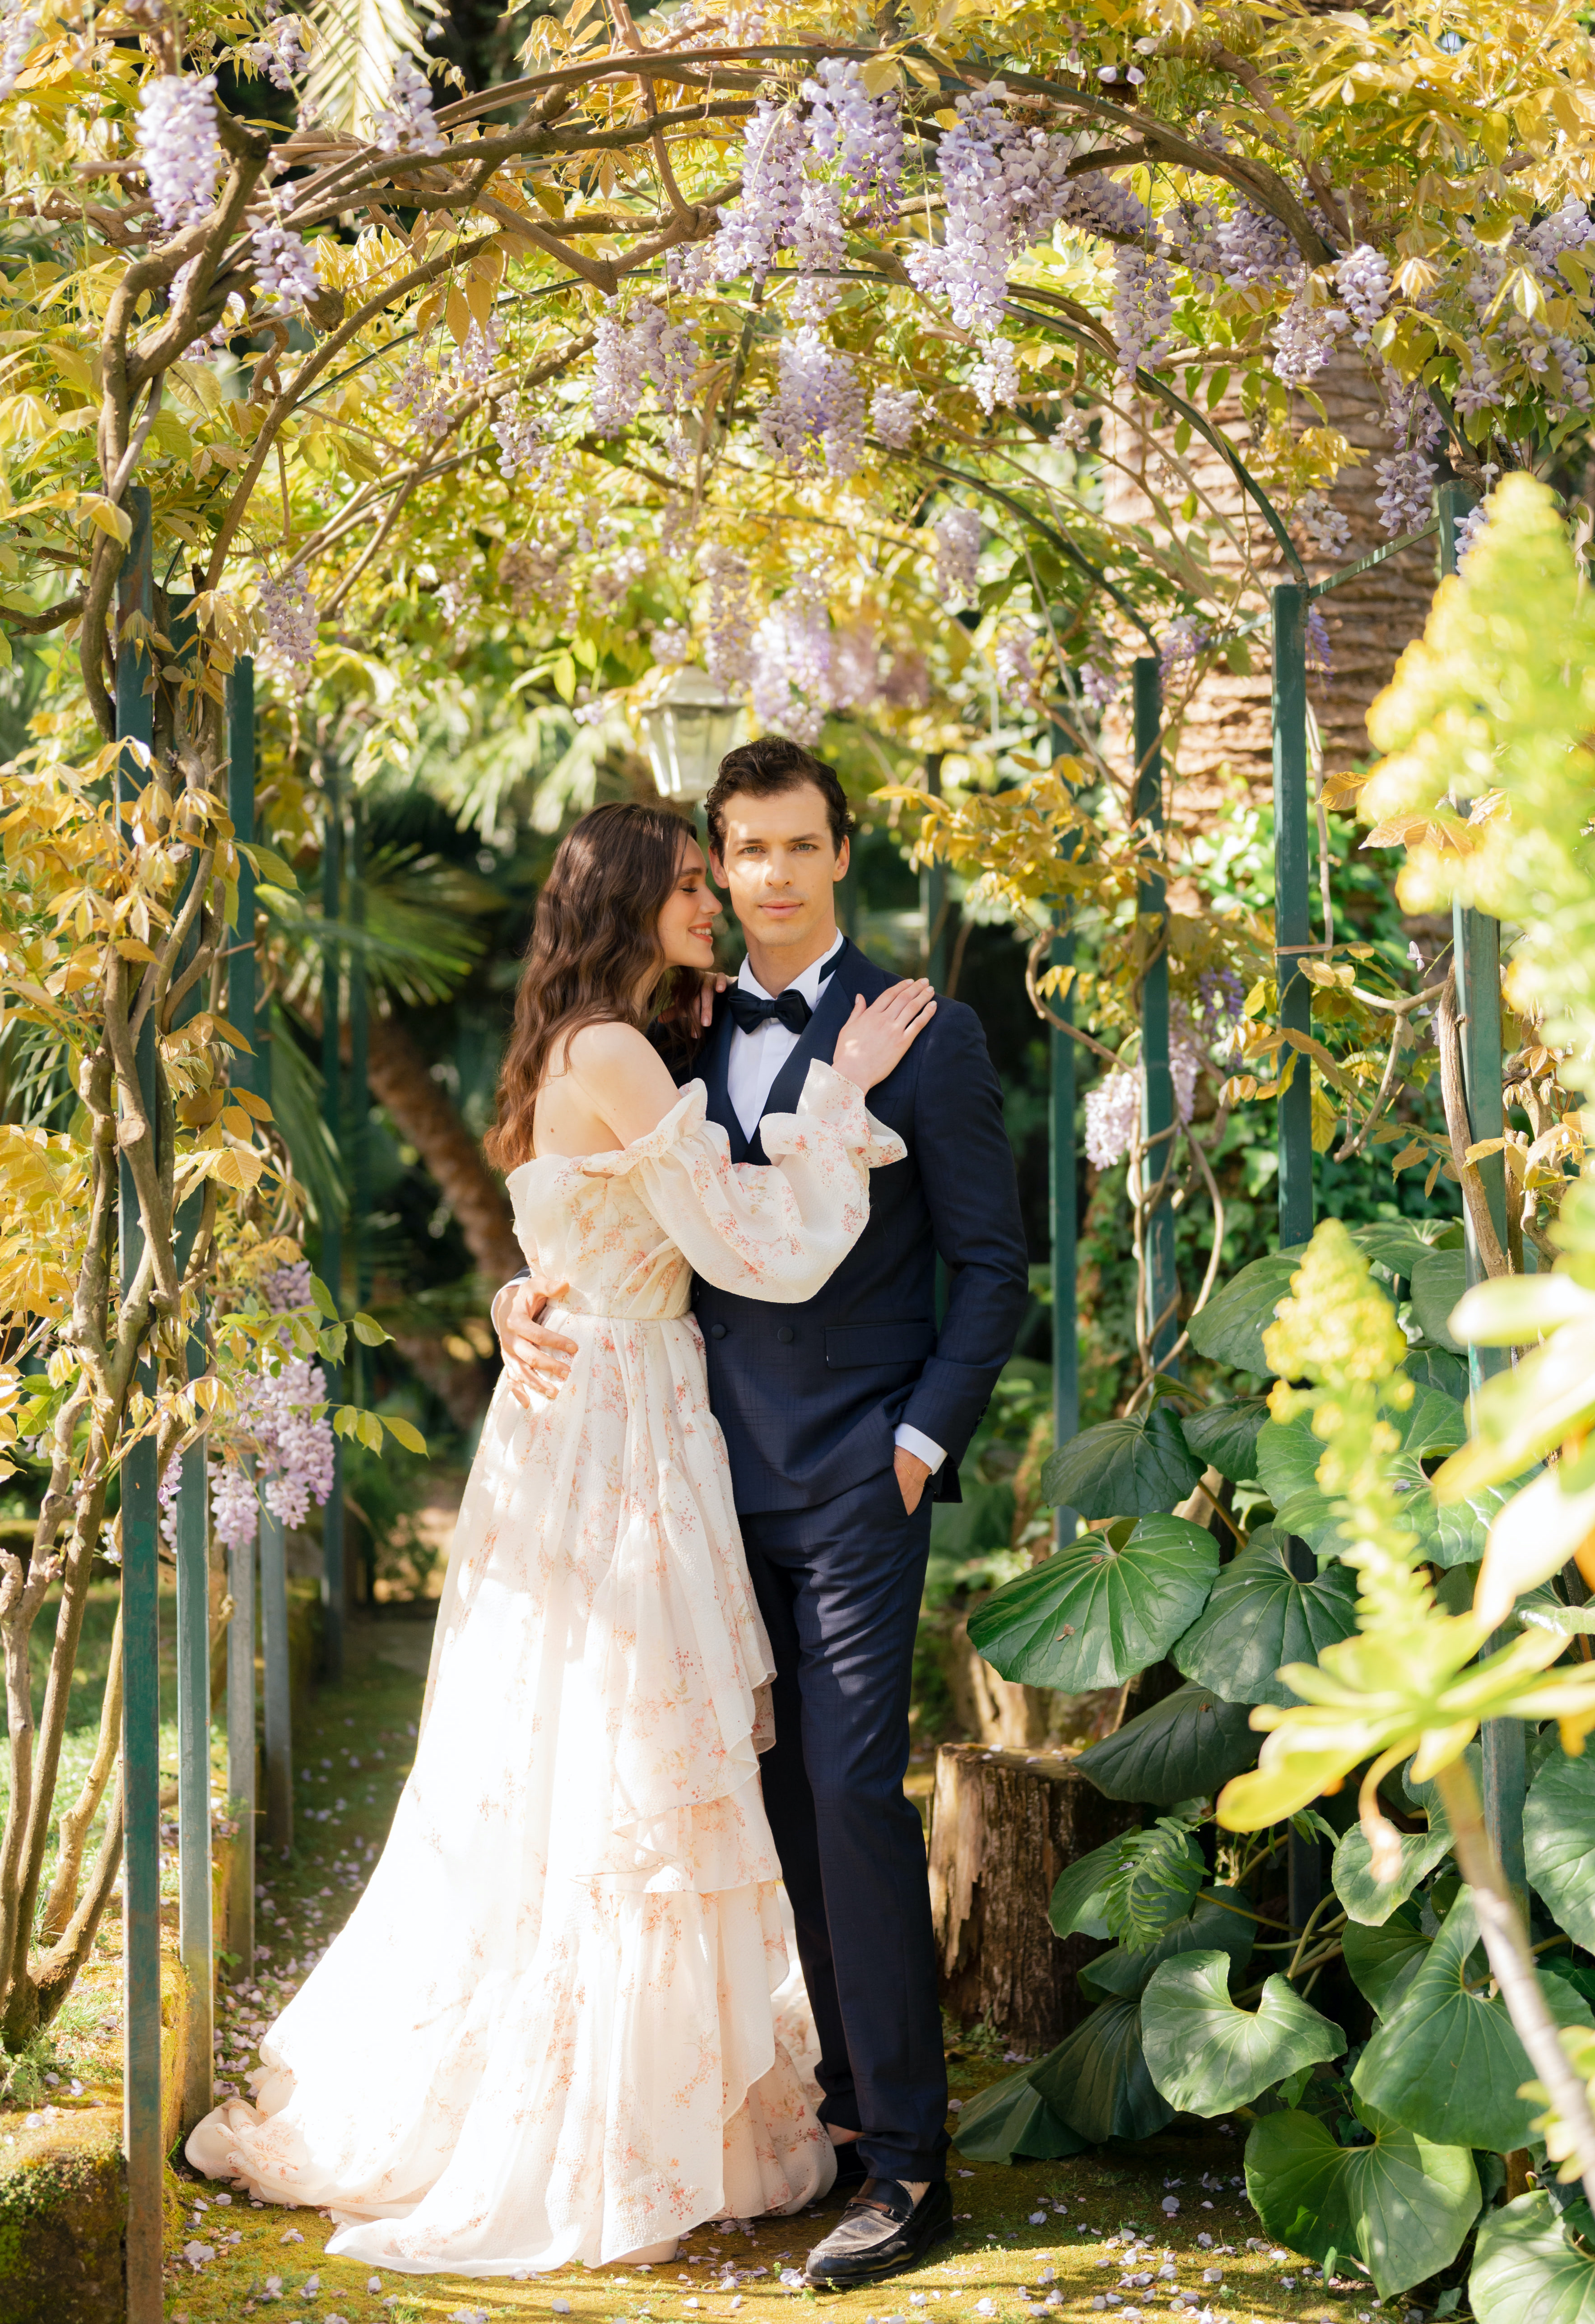 Wisteria creates a canopy of a bride and groom's head as they pose for the camera in a lush garden at their wedding venue in Italy.